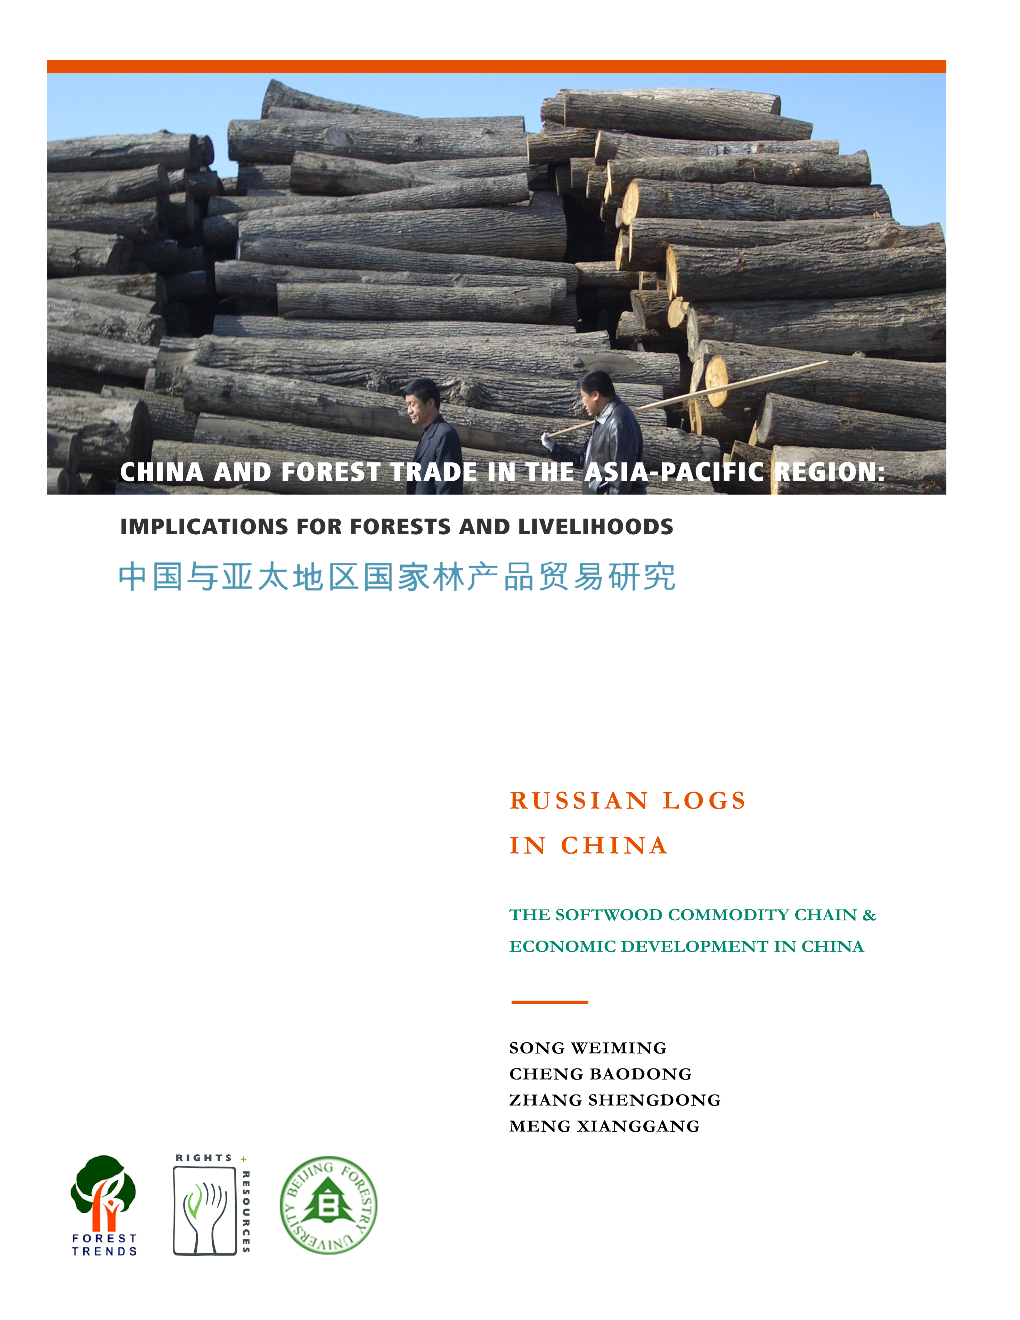 Russian Logs in China